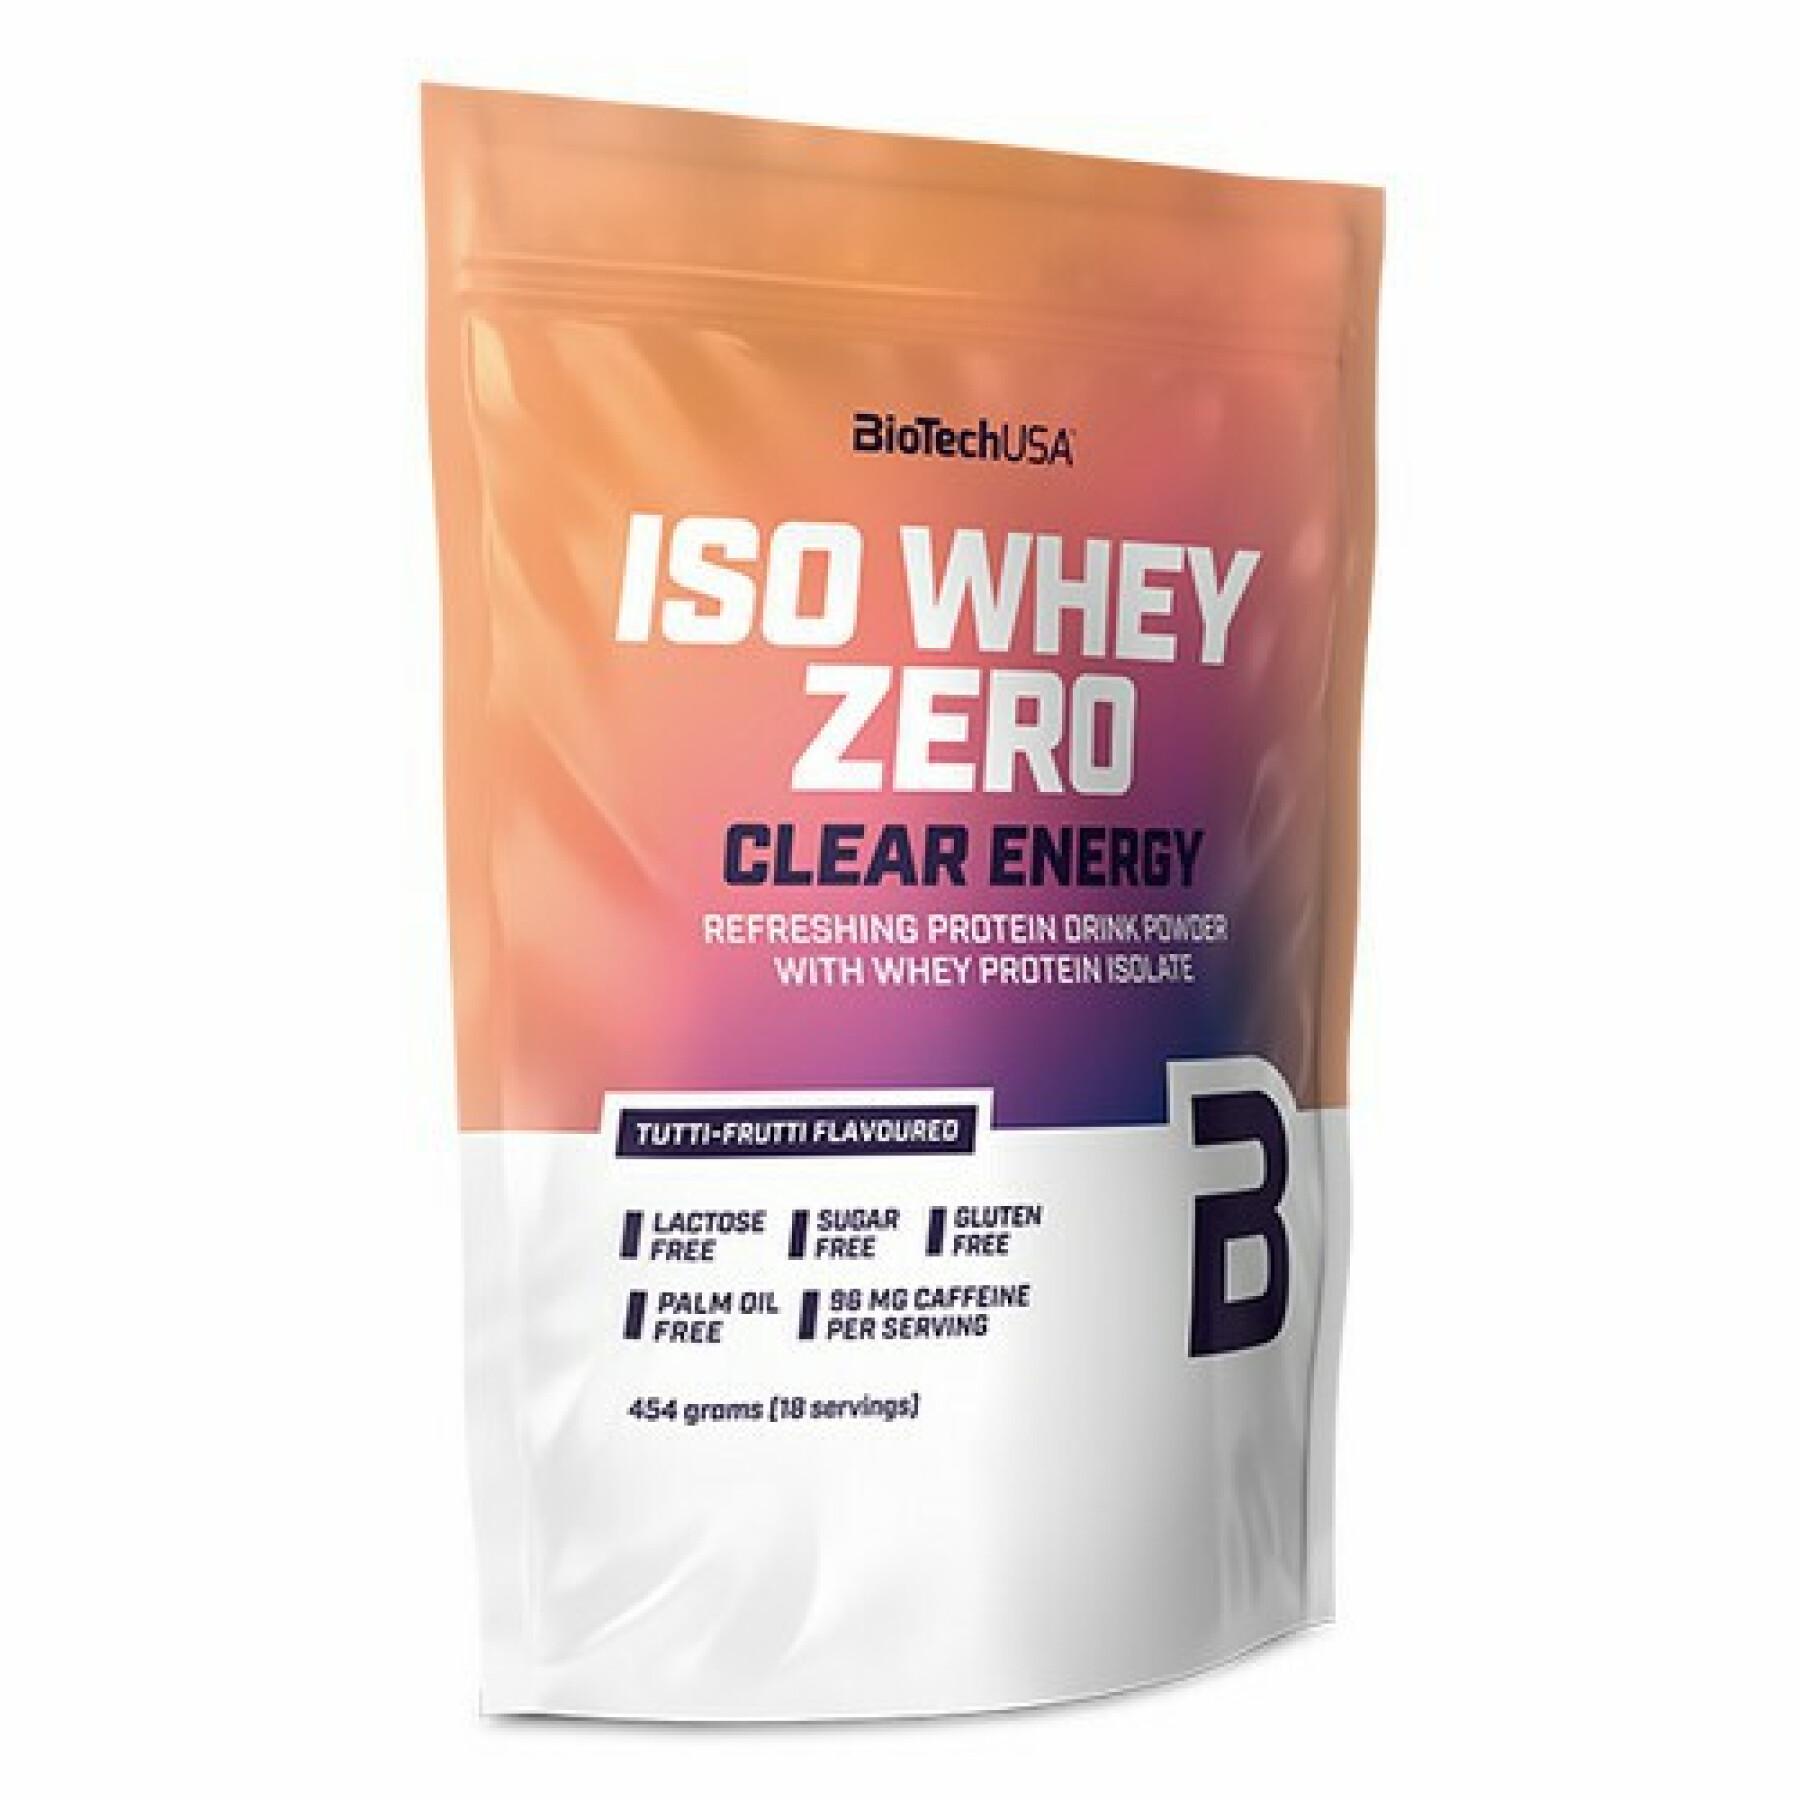 Pack of 10 bags of protein Biotech USA iso whey zero clear energy - Tutti-frutti - 454g